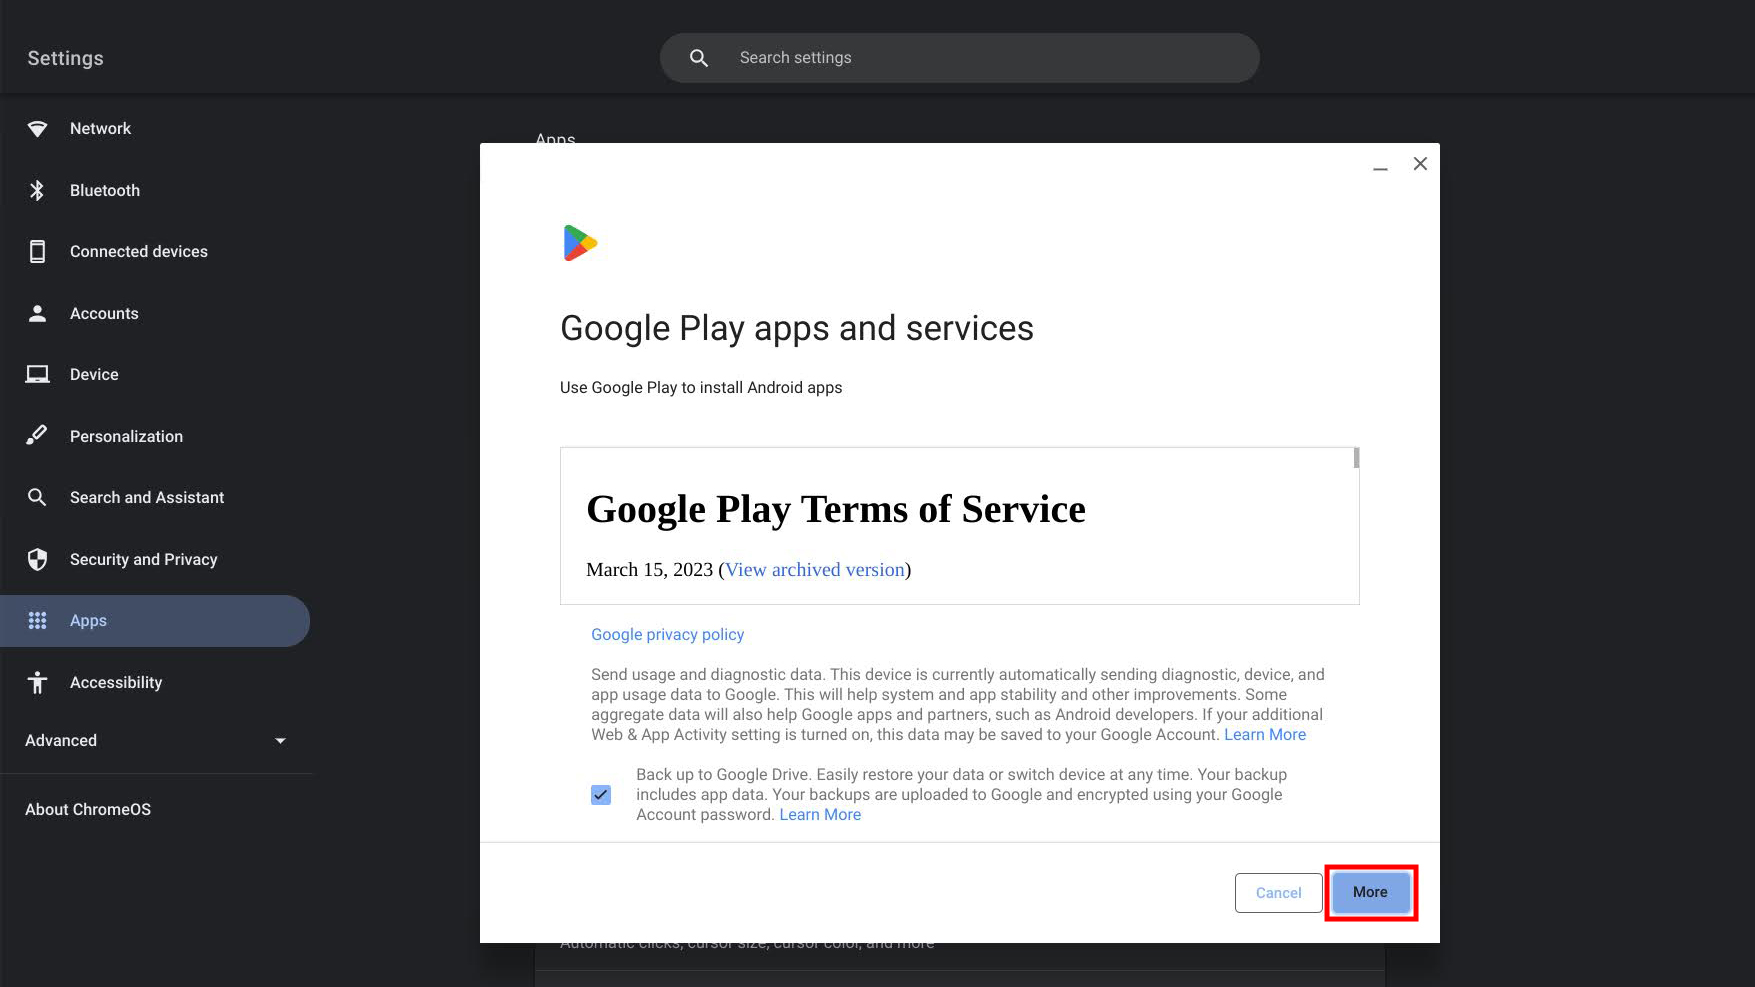 How to enable the Google Play Store on Chromebook 2